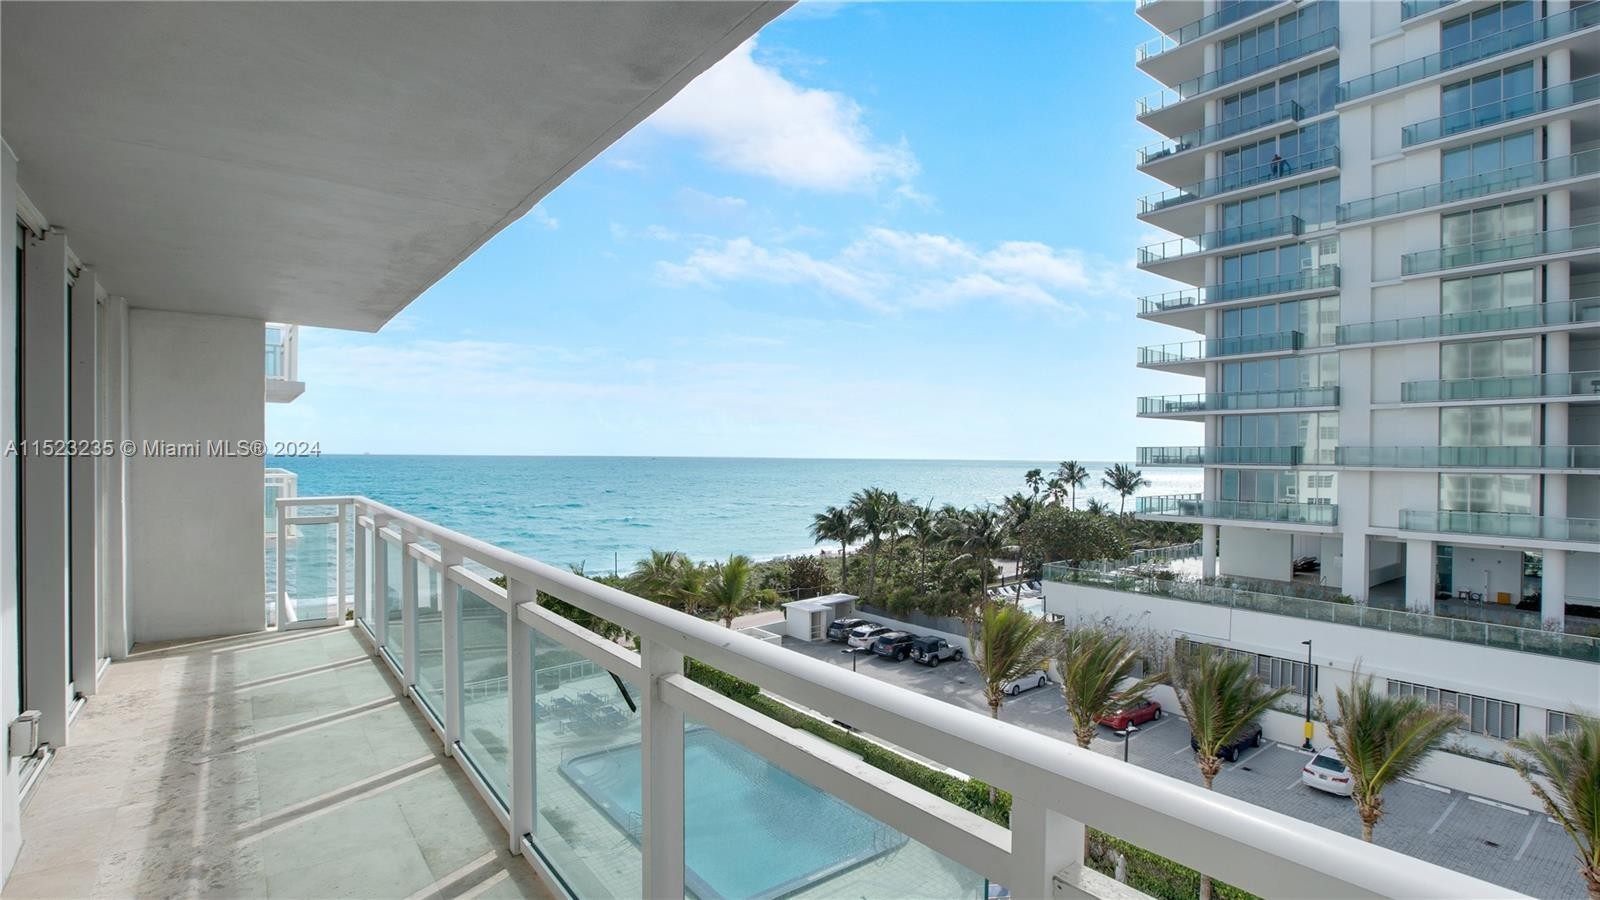 19. 6917 Collins Ave